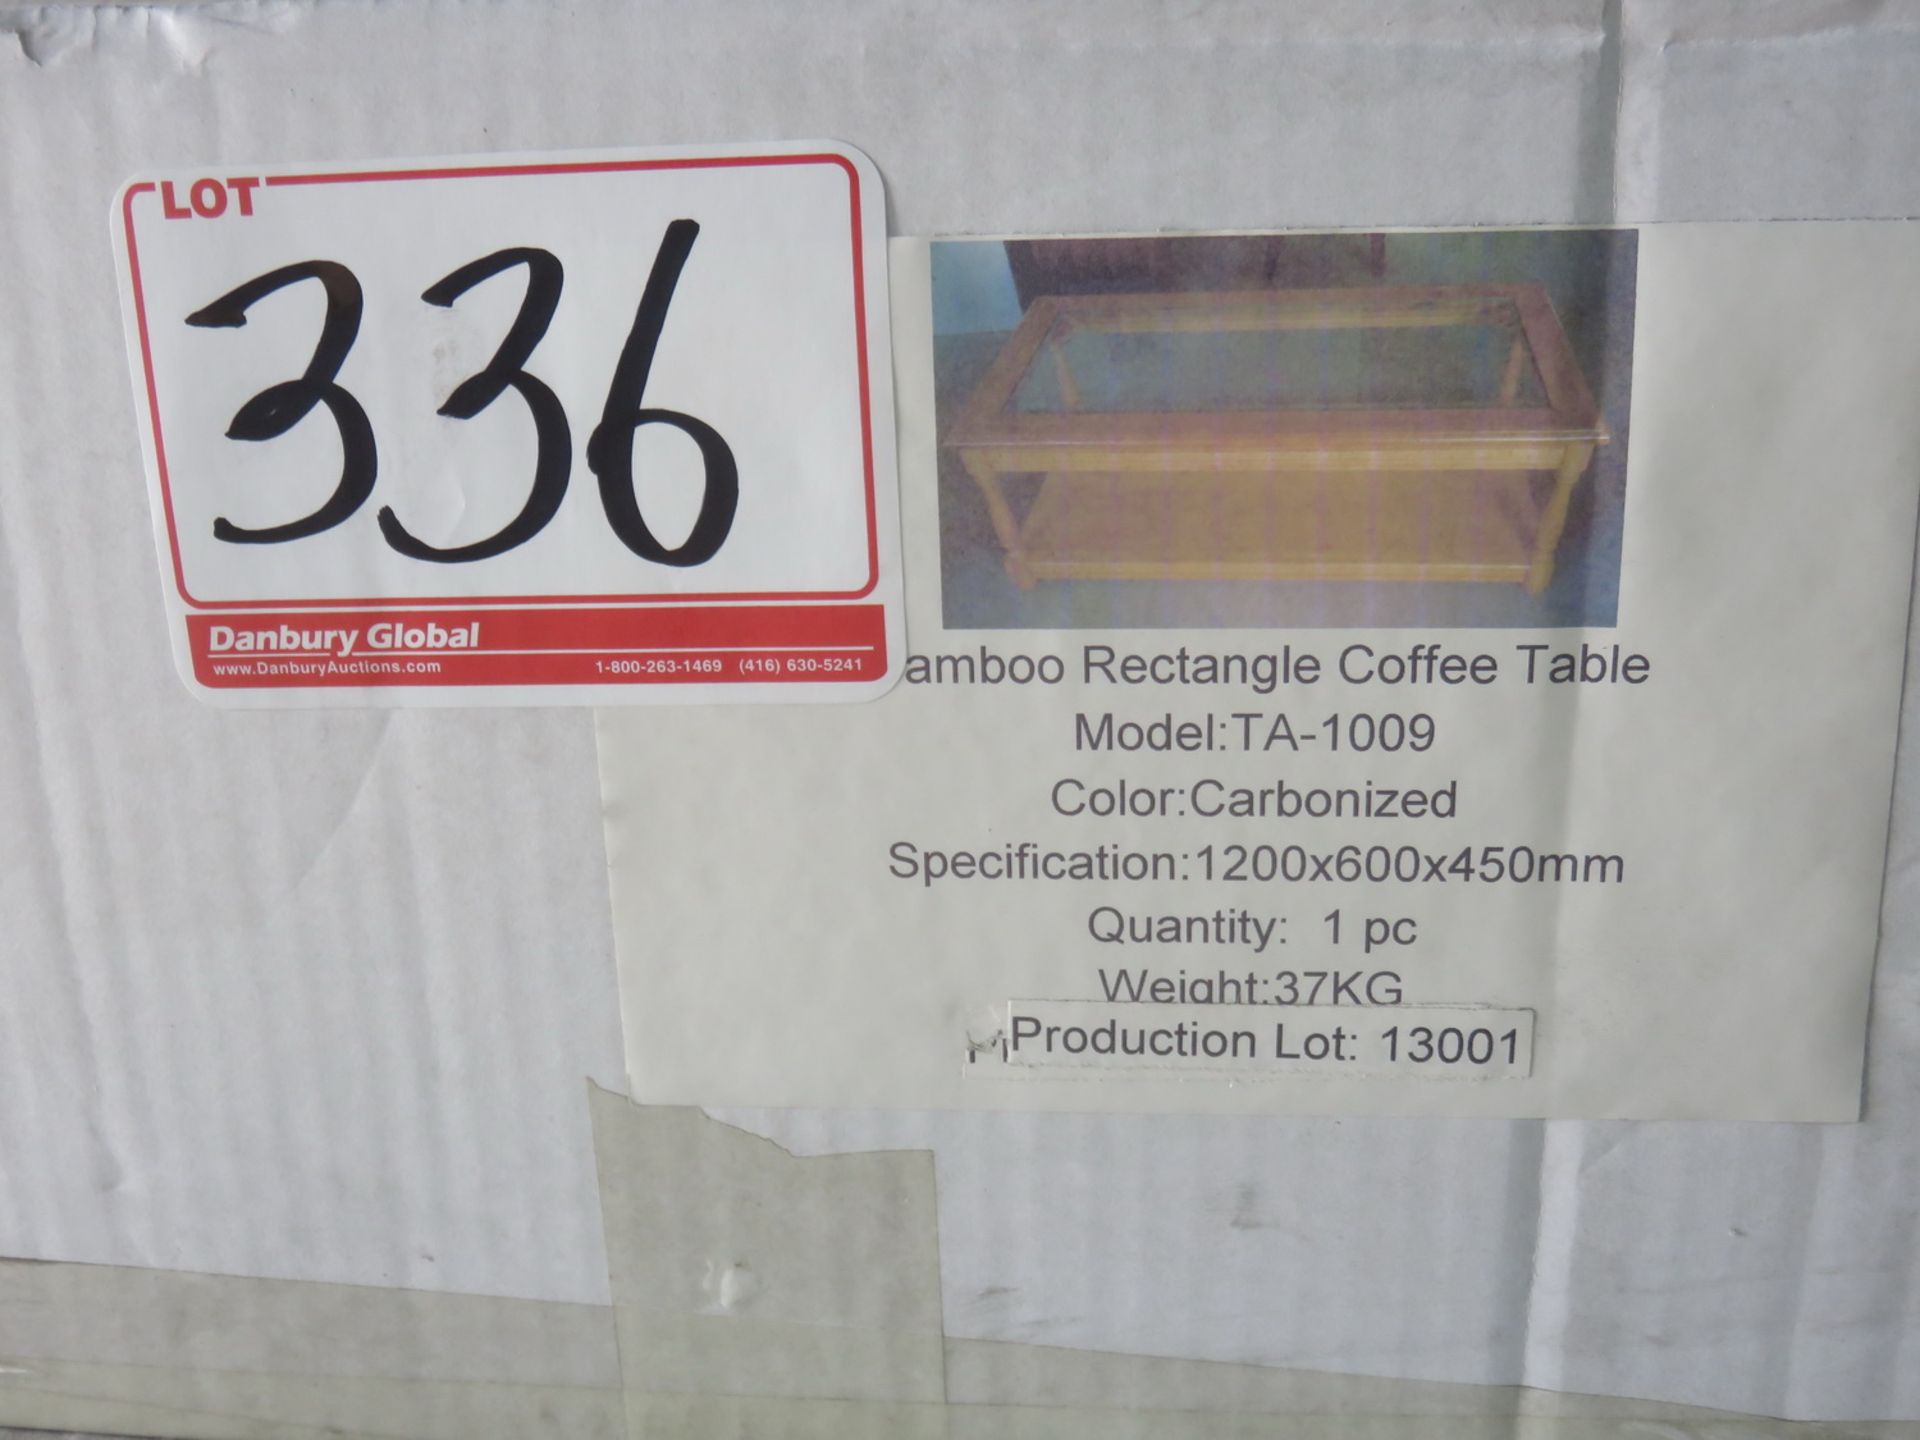 BAMBOO TA-1009 CARBONIZED RECTANGULAR COFFEE TABLE - 1200 X 600 X 450MM (NEW IN BOX)